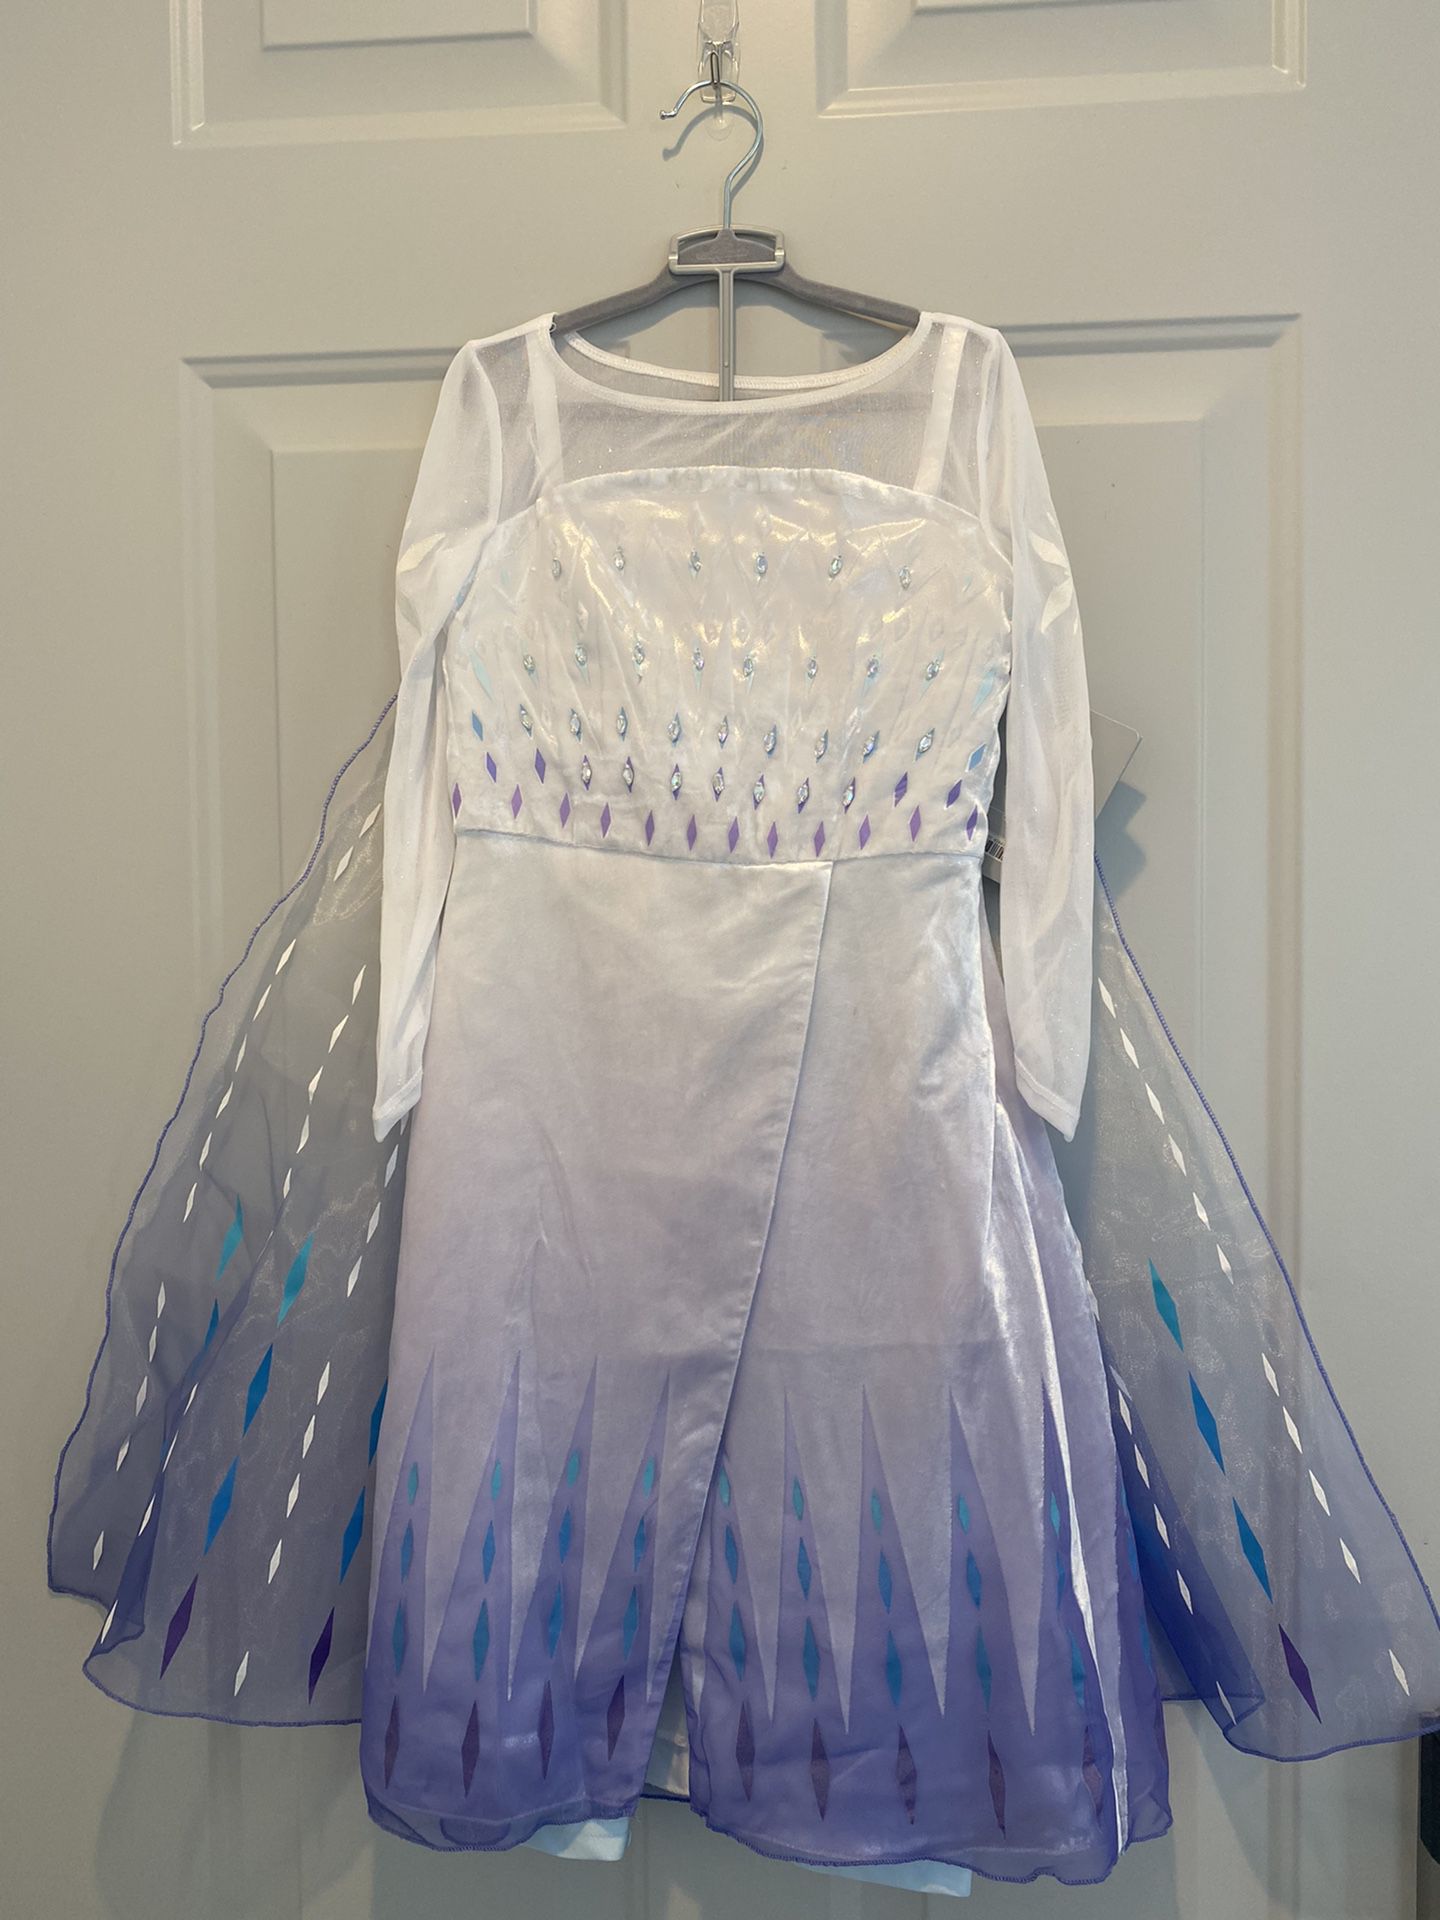 Frozen 2 Elsa Princess Dress Costume Halloween New With Tags Size 4